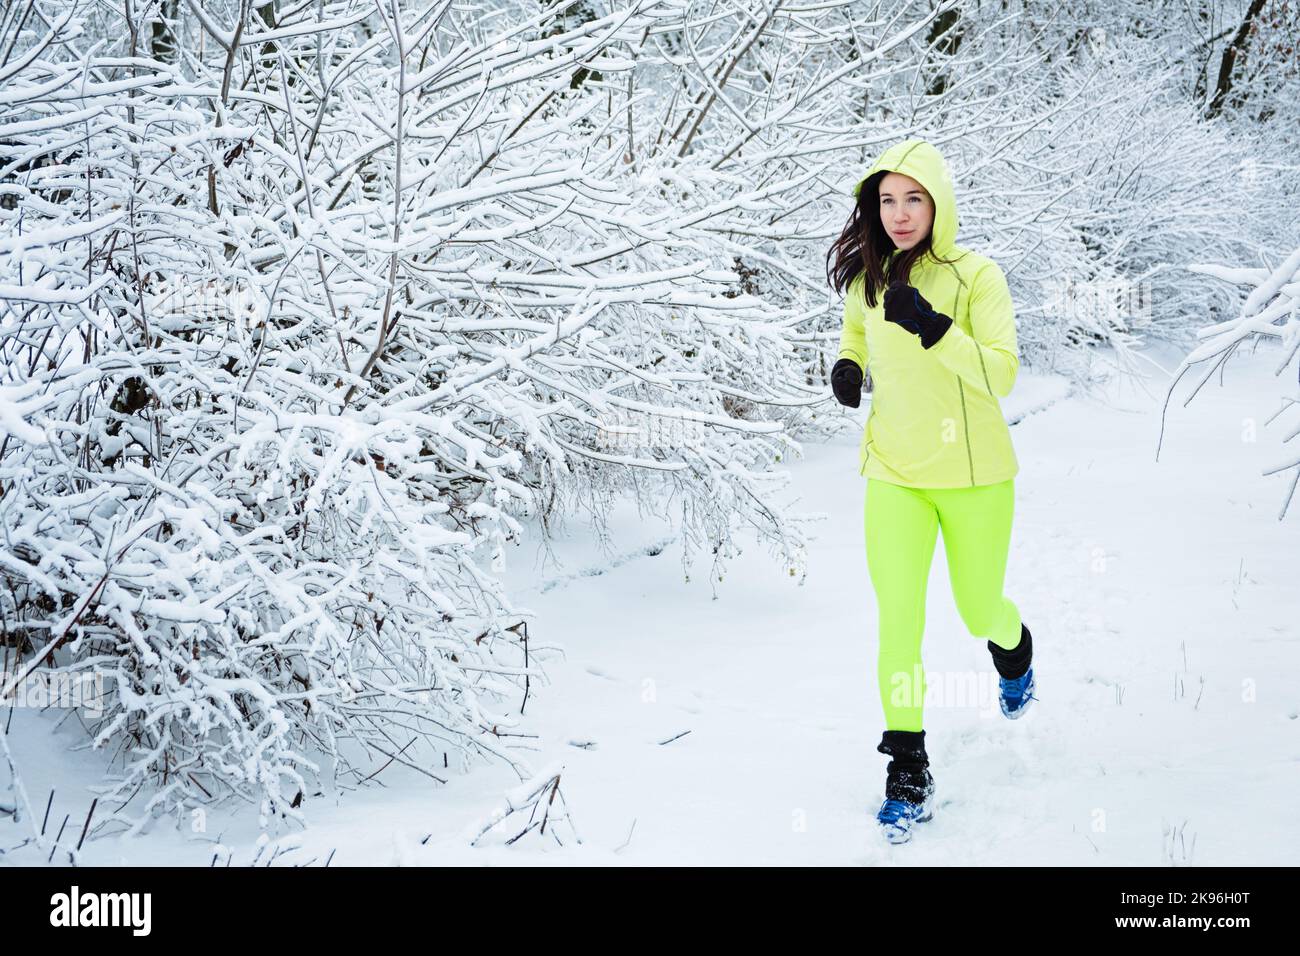 Cold Weather Running. Happy woman running in winter snowy park, forest. Running athlete woman sprinting during winter training outside in cold snow Stock Photo